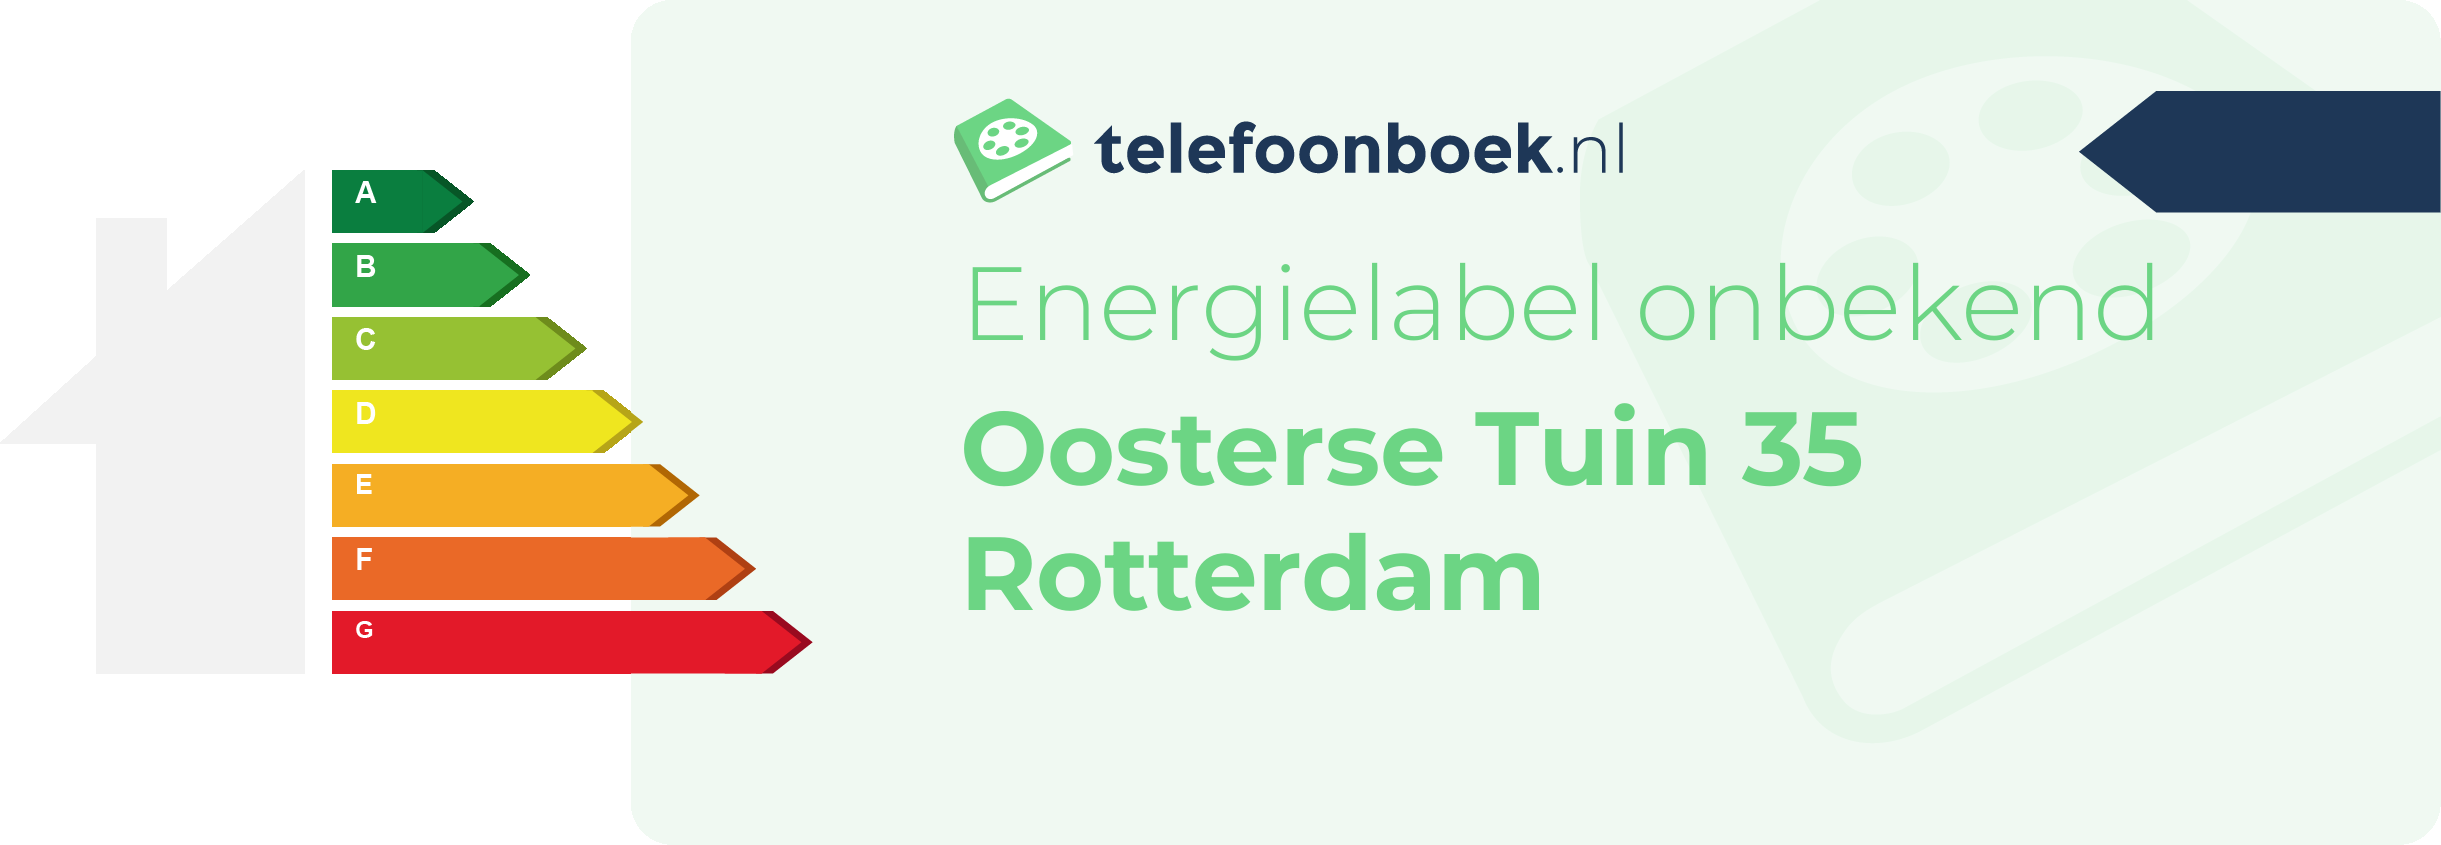 Energielabel Oosterse Tuin 35 Rotterdam